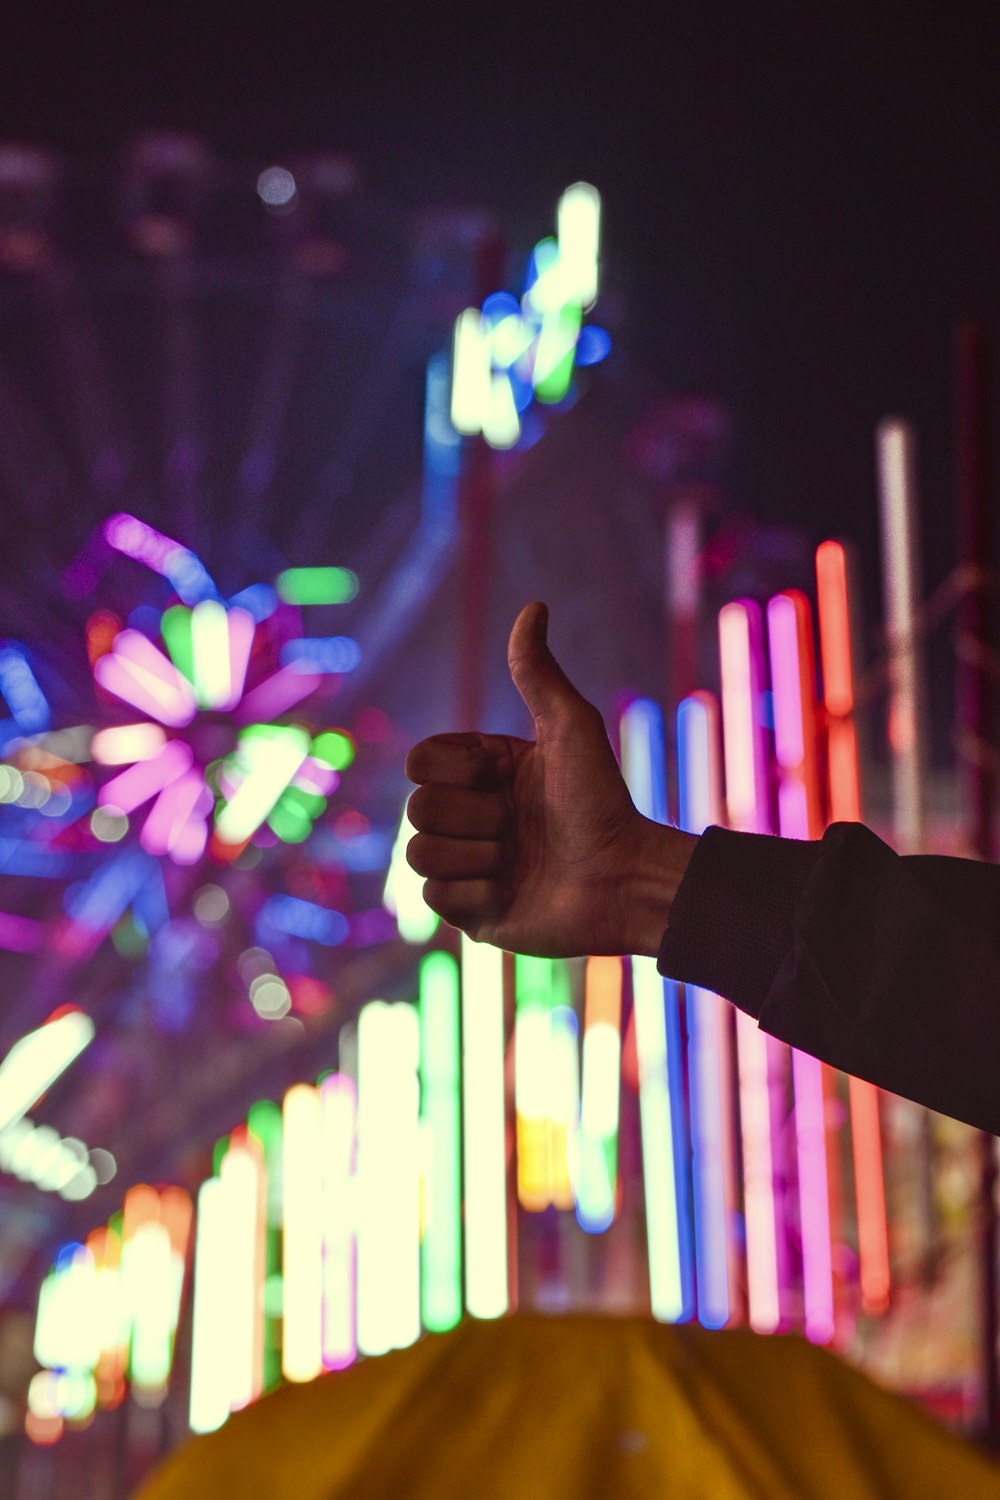 a person giving a thumbs up in front of a ferris wheel